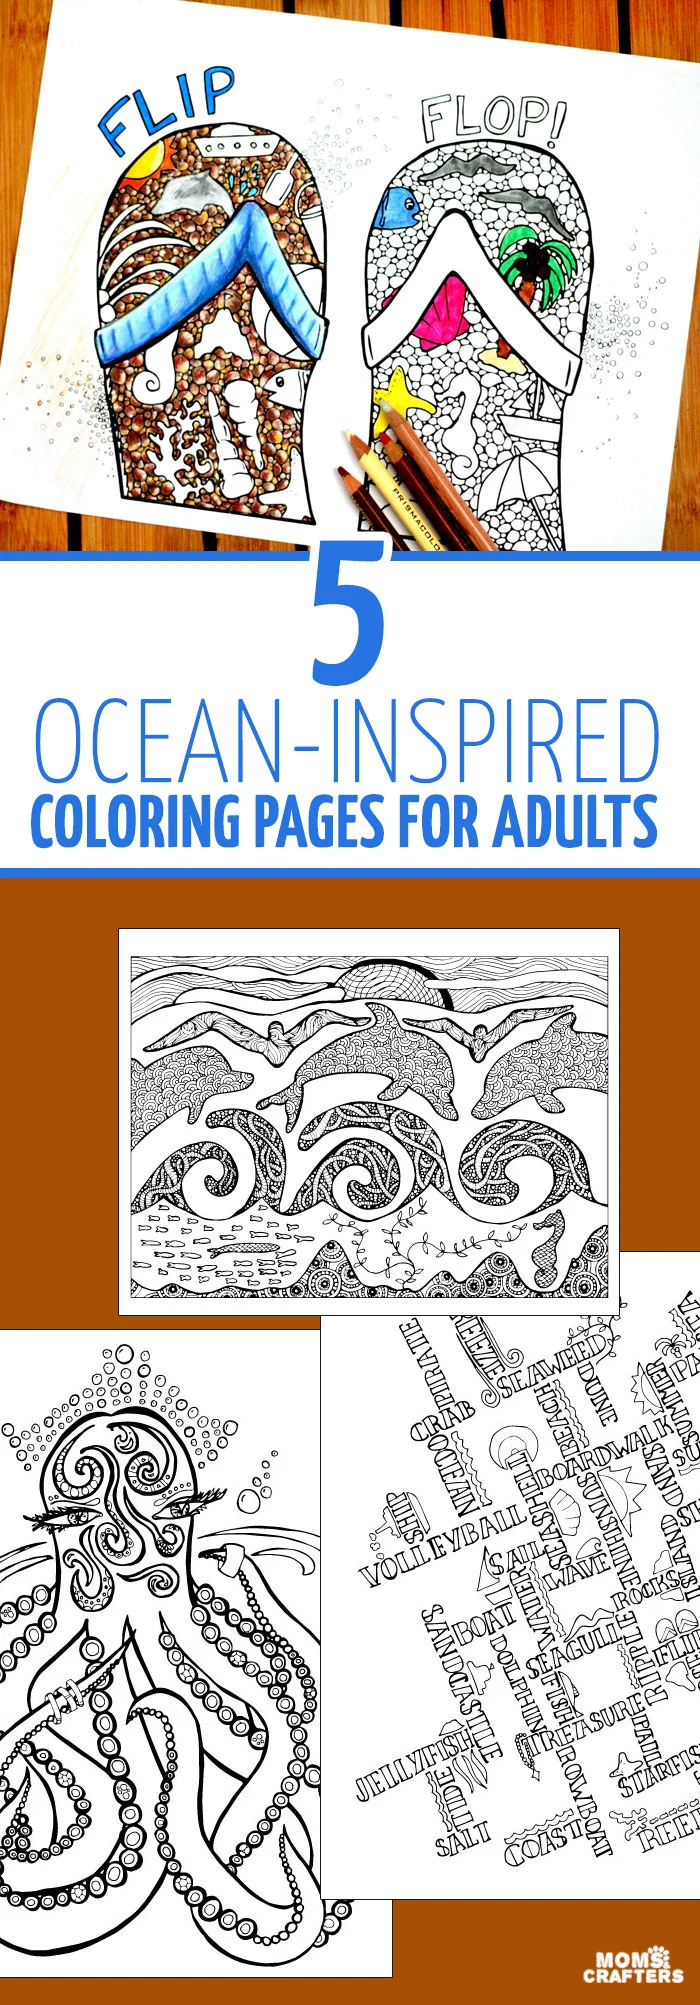 These beach themed ocean coloring pages for adults are so cool - many different levels of difficulty, and unique complex hand drawn pages. YOu'll love these sea coloring pages, especially the flip flops.